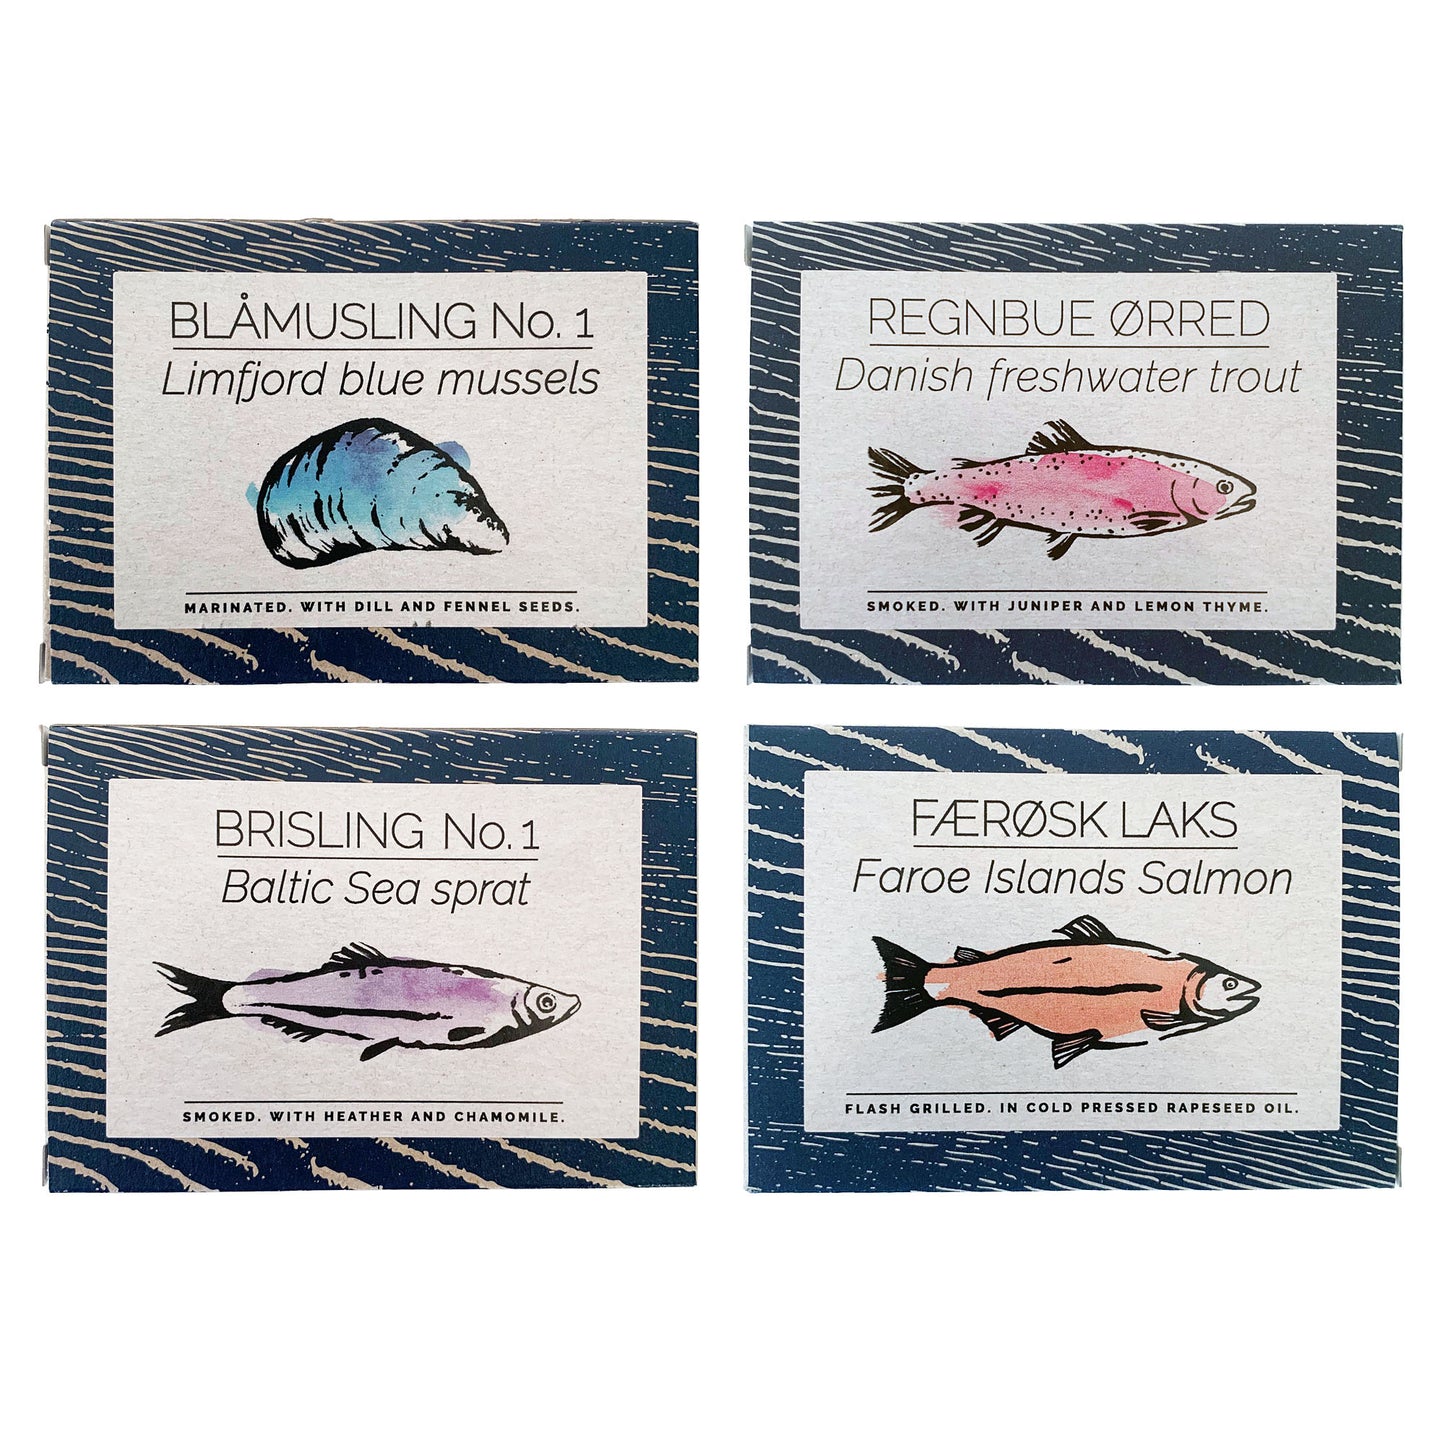 FANGST - Canned Nordic Seafood Variety Pack of 4